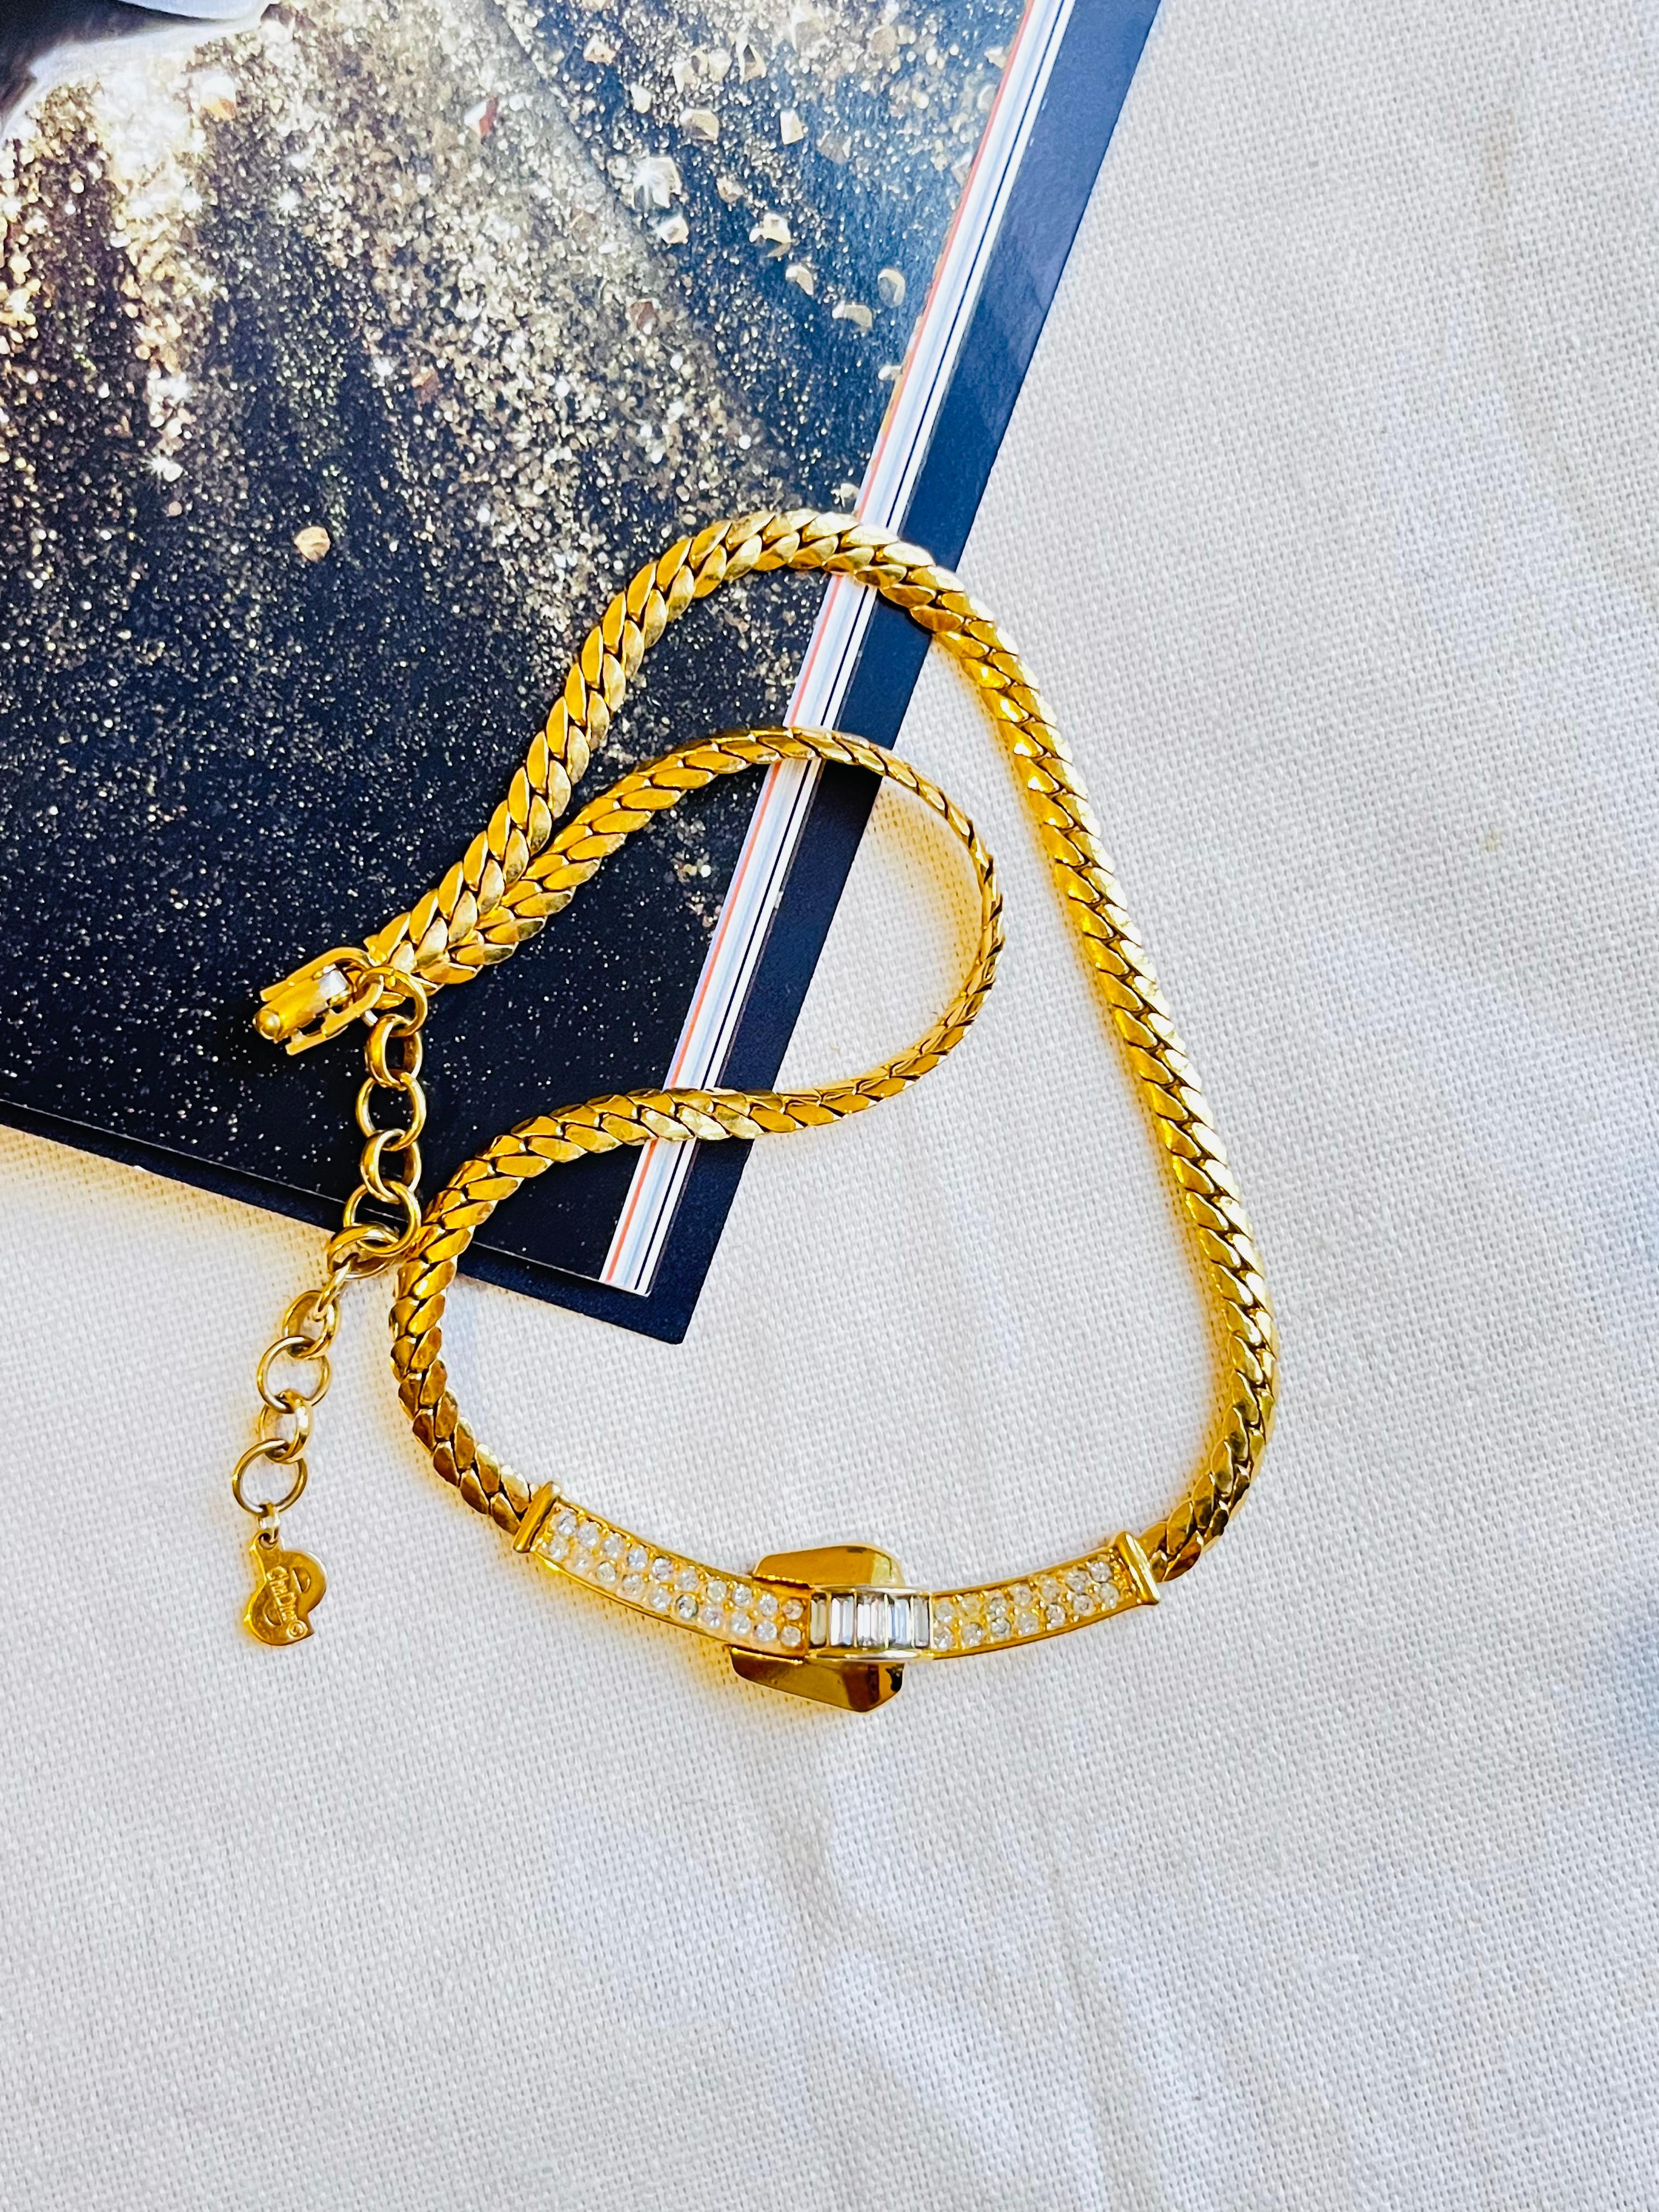 Very excellent condition and very new. Colour loss at the clasp. 

Marked 'Chr.Dior (C) '. 100% Genuine.

It is around 40 years old. This is a very stylish and rare piece of jewellery.

Length: 32 cm. Extend chain: 6 cm. Pendant: 5.5*1.5